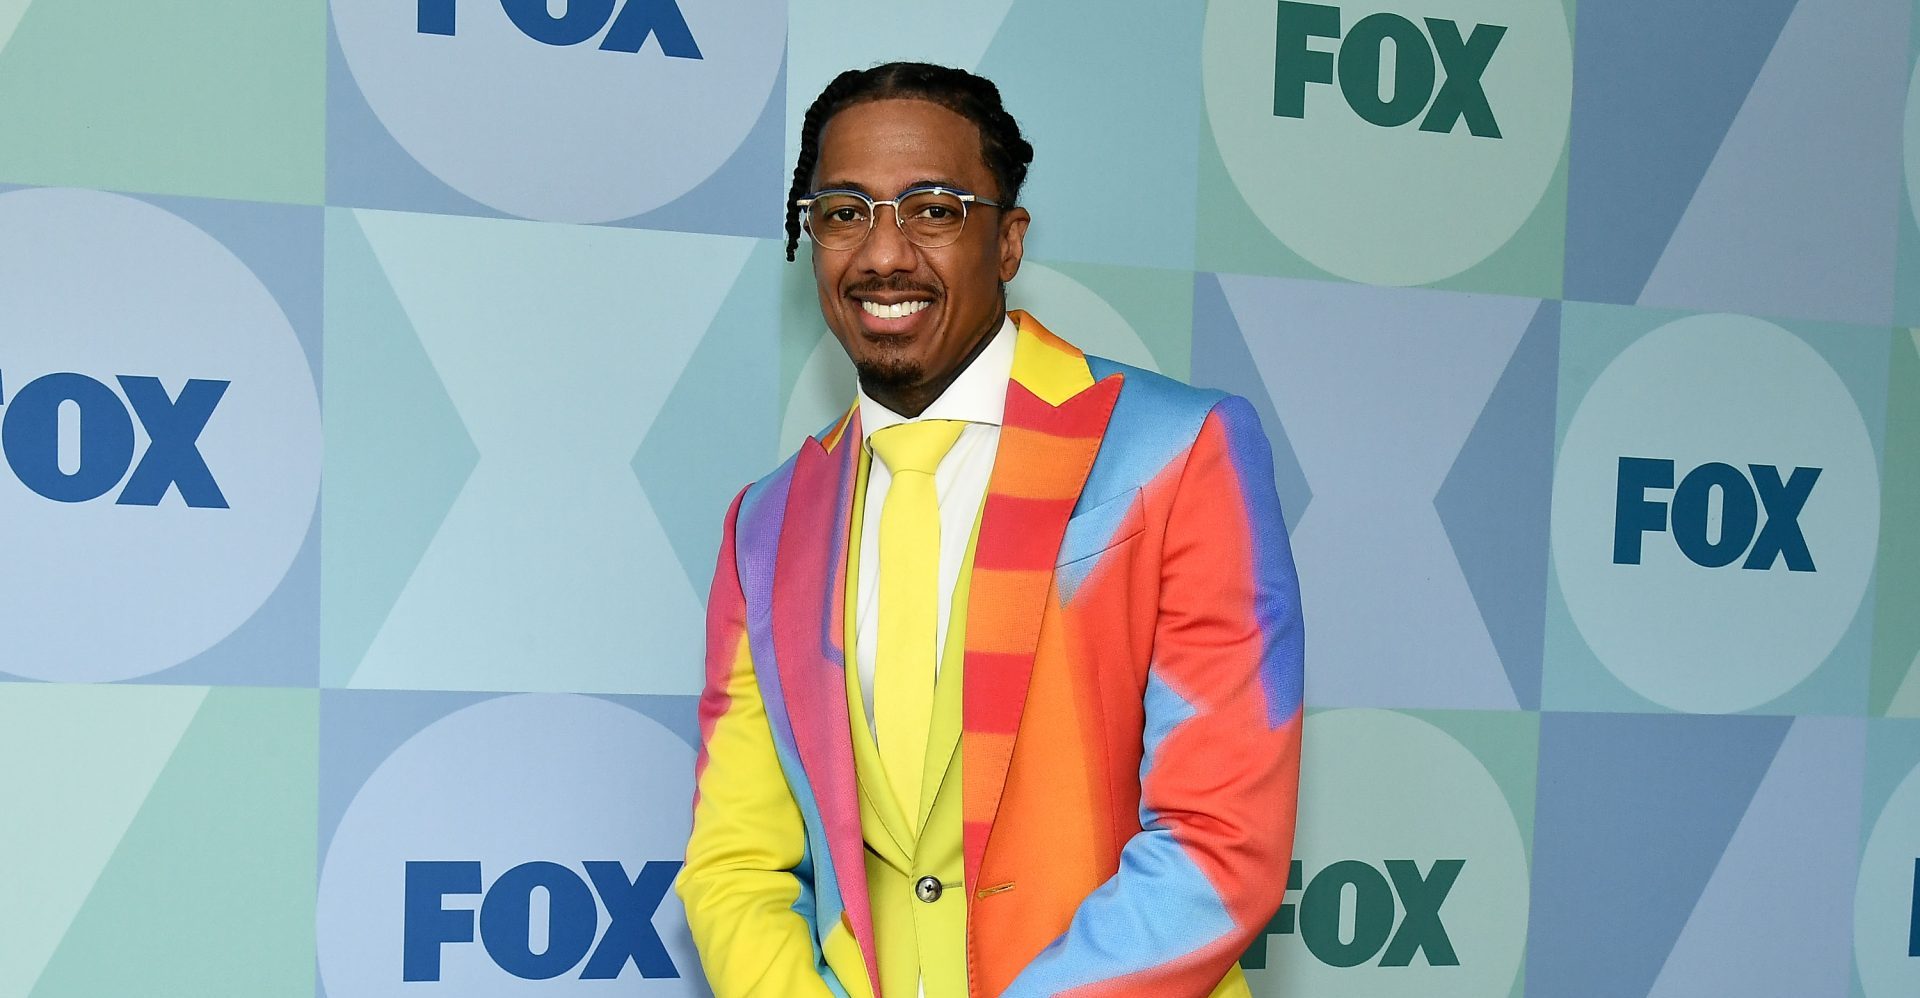 Abby De La Rosa & Nick Cannon Show Love To Their 2-Year-Old Son On World Autism Awareness Day (Video)